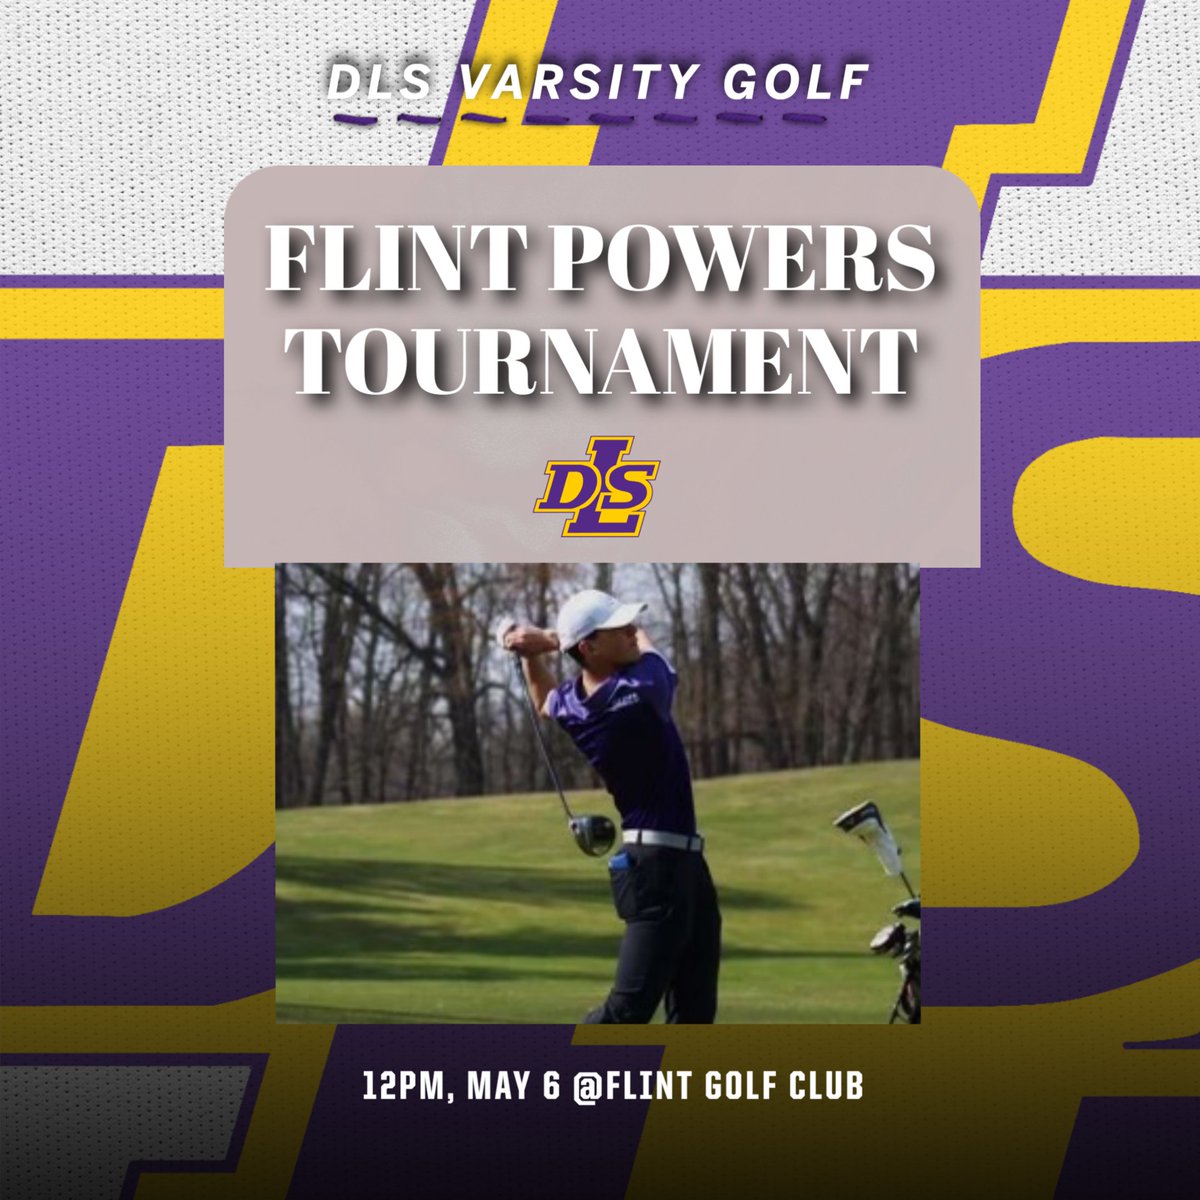 DLS Varsity Golf heads to Flint Golf Club for the Flint Powers Tournament at 12PM, today, May 6. Let’s go, Pilots!

#PilotPride @DLSPilotsGolf